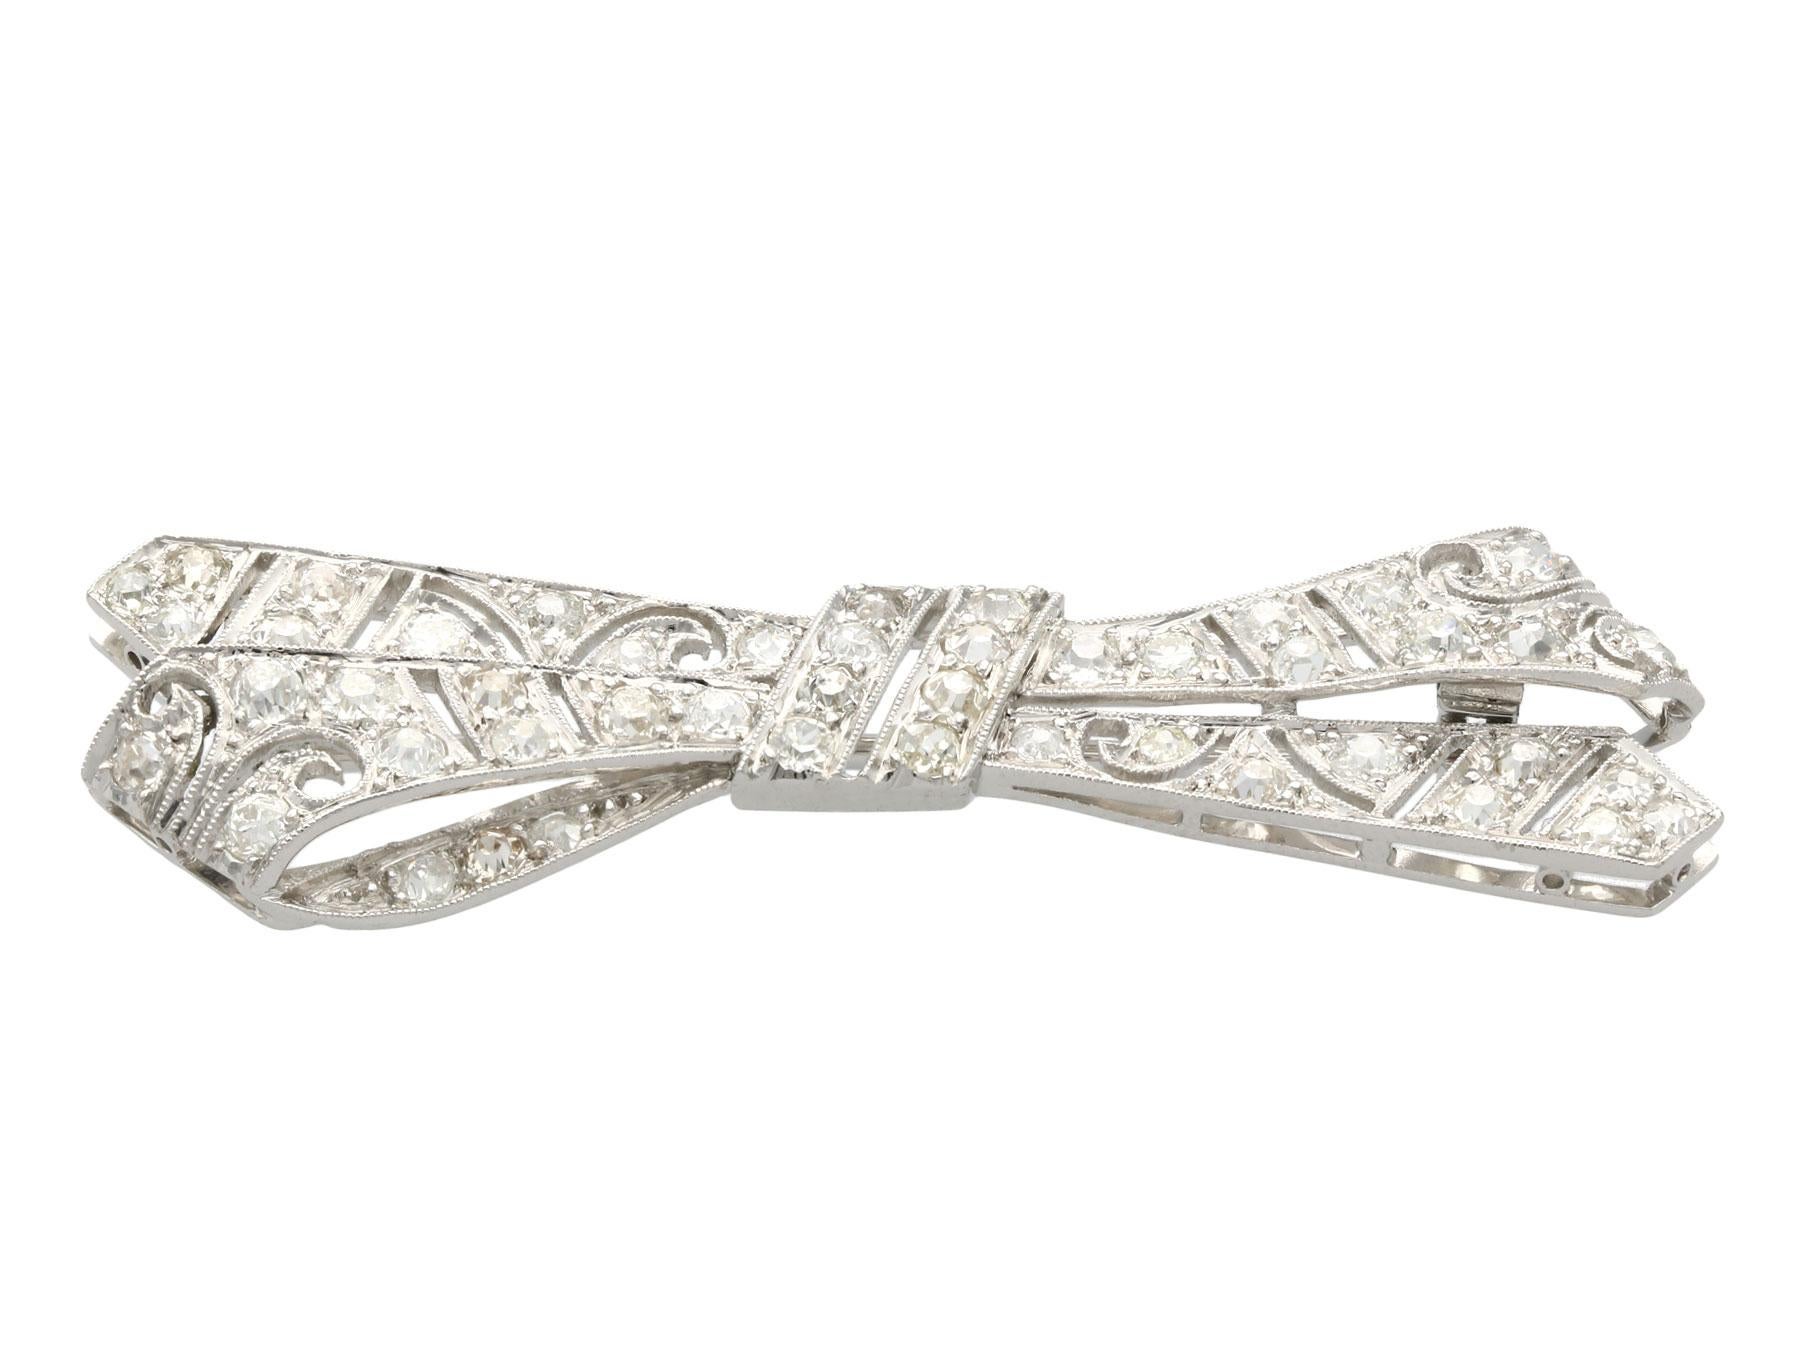 A stunning, fine, and impressive antique 2.36 carat diamond and platinum brooch in the form of a bow; part of our antique jewellery and estate jewelry collections.

This stunning, fine, and impressive antique diamond brooch has been crafted in the